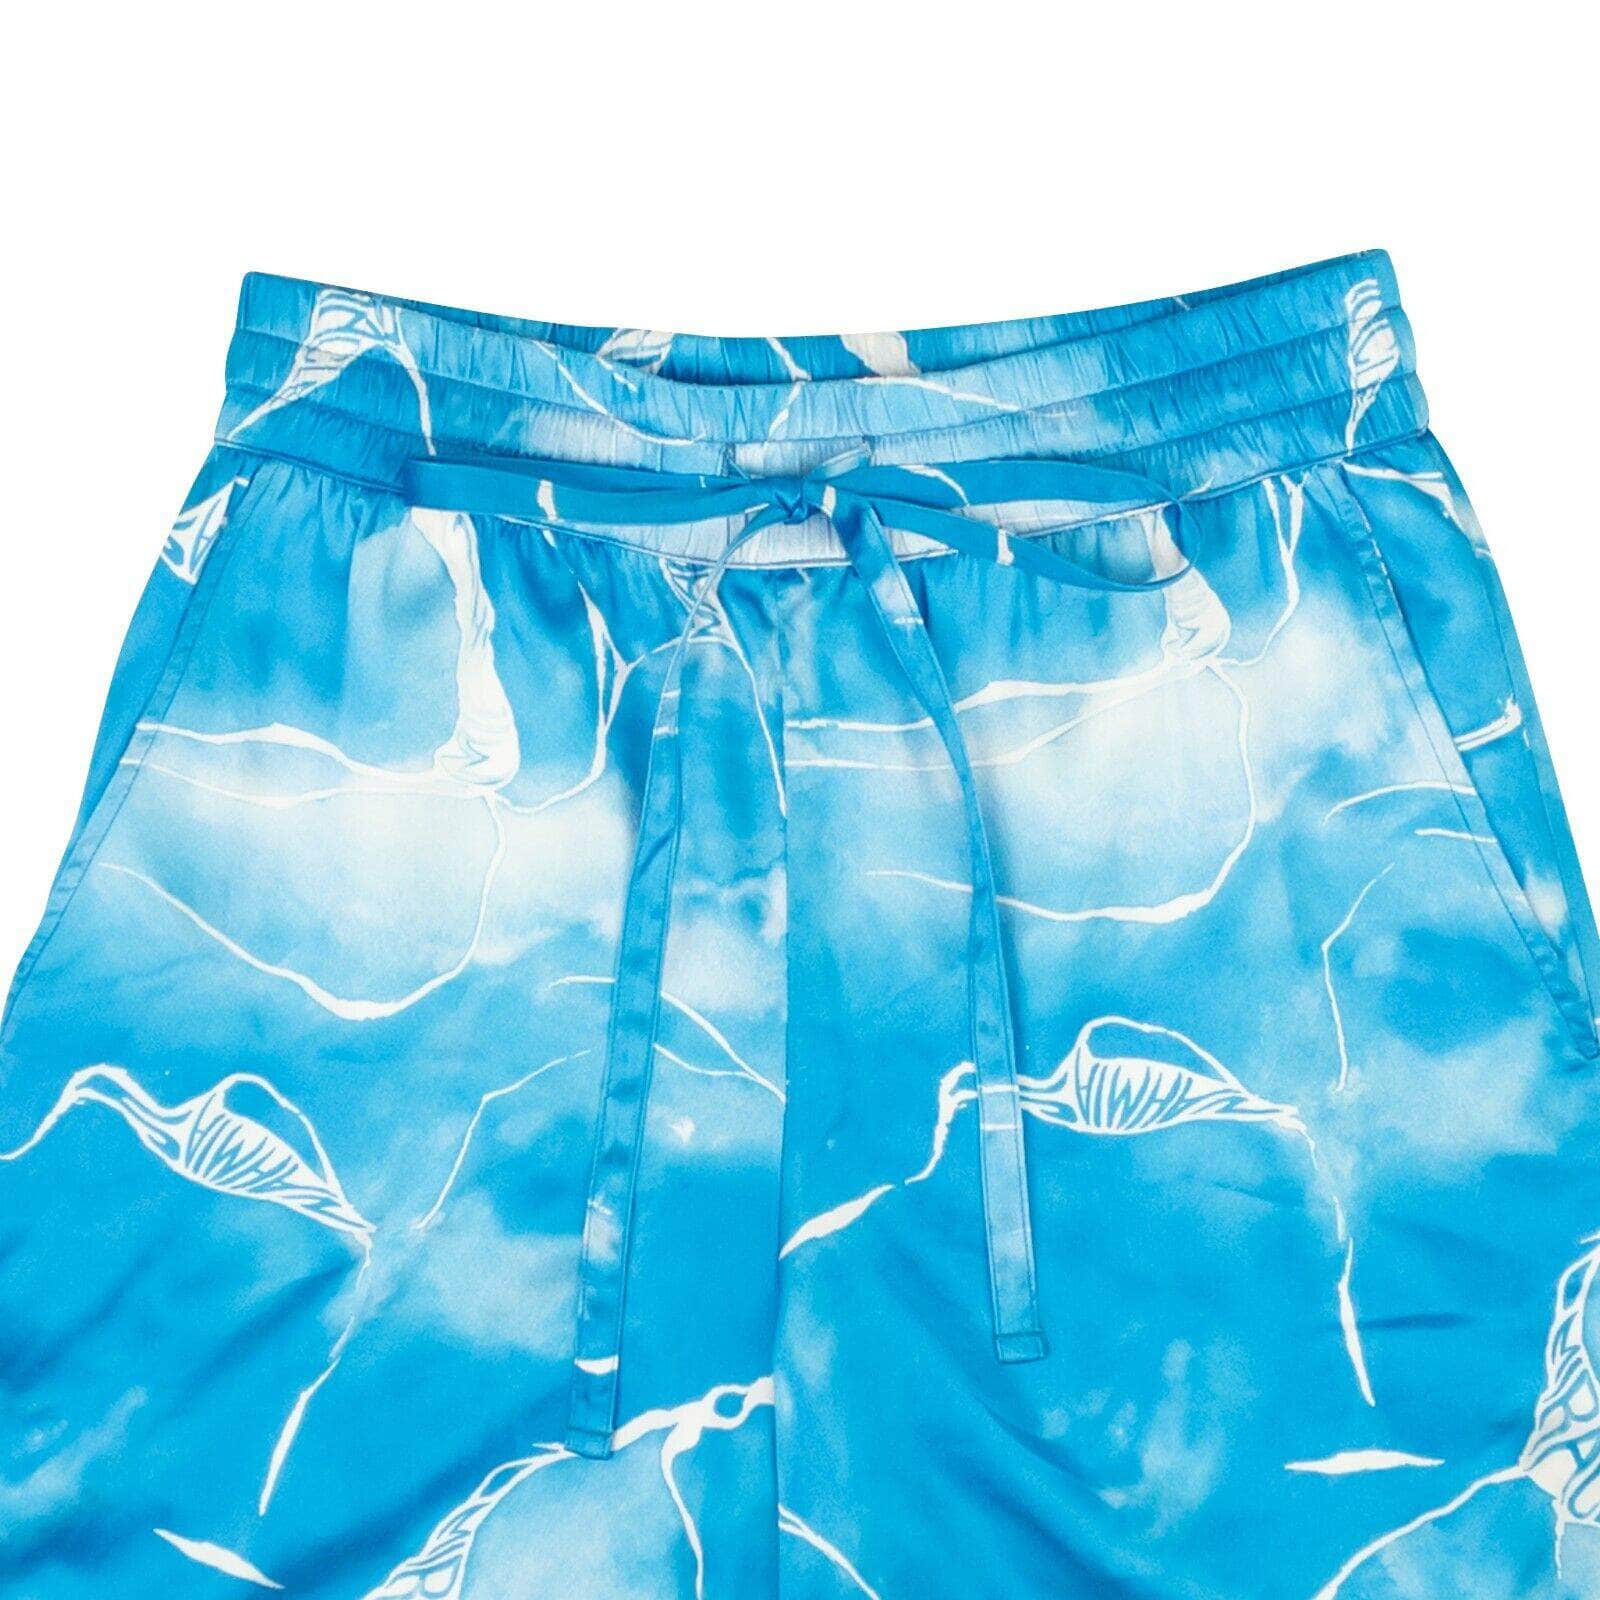 Nahmias 500-750, channelenable-all, chicmi, couponcollection, gender-mens, main-clothing, mens-shoes, nahmias, size-l, size-m, size-s, size-xl, size-xs, size-xxl Blue Silk Tie Dye Printed Shorts